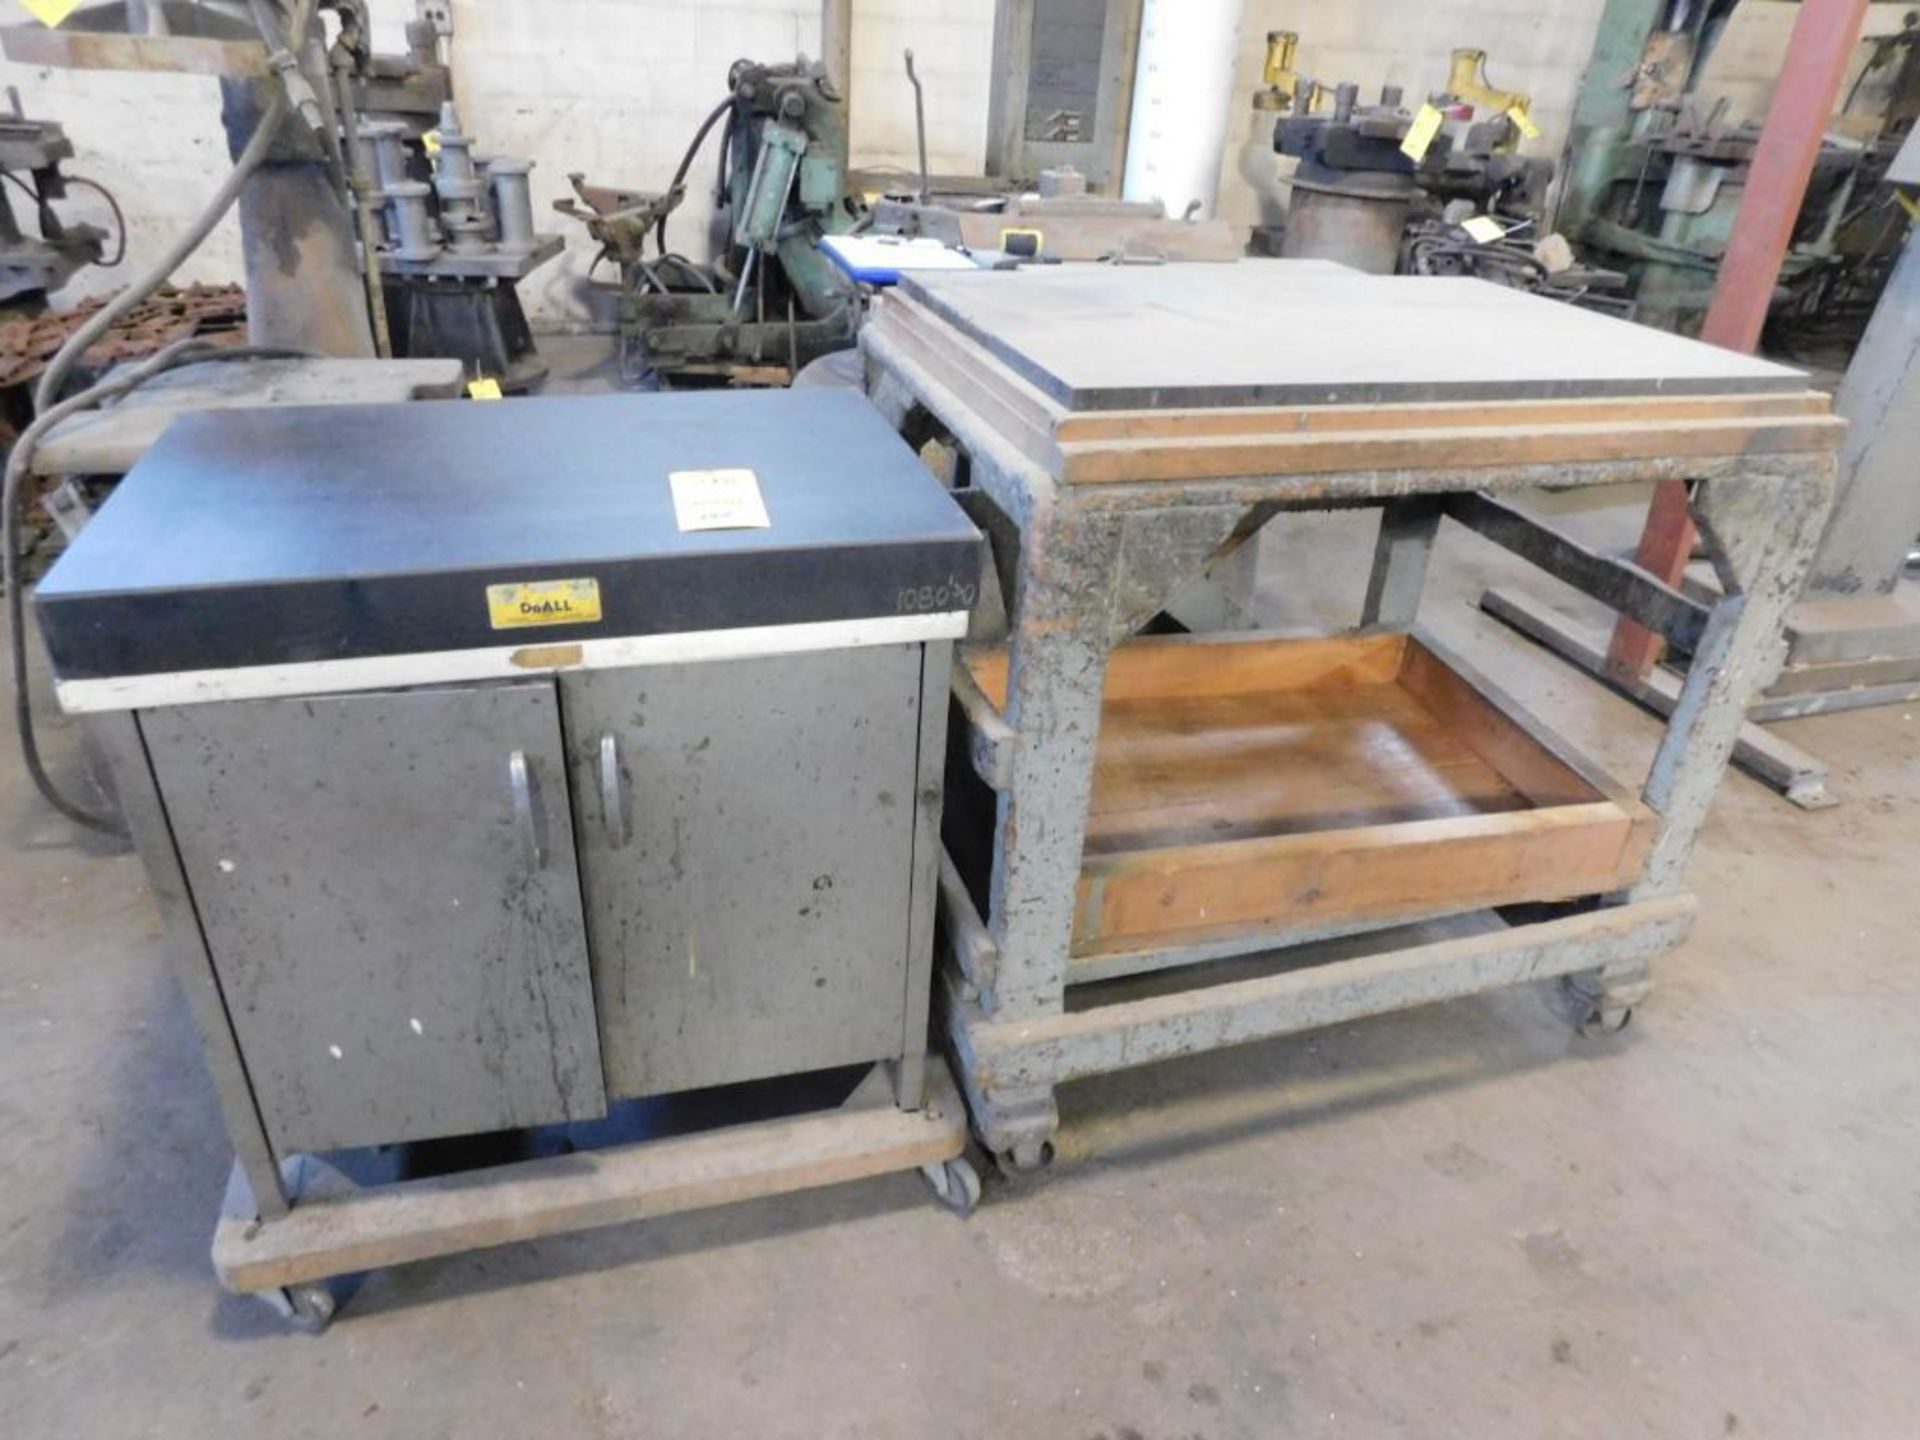 LOT: (1) Rolling Cabinet w/Do All 30" x 20" Granite Surface Plate, (1) 36" x 24" Rolling Table w/1"